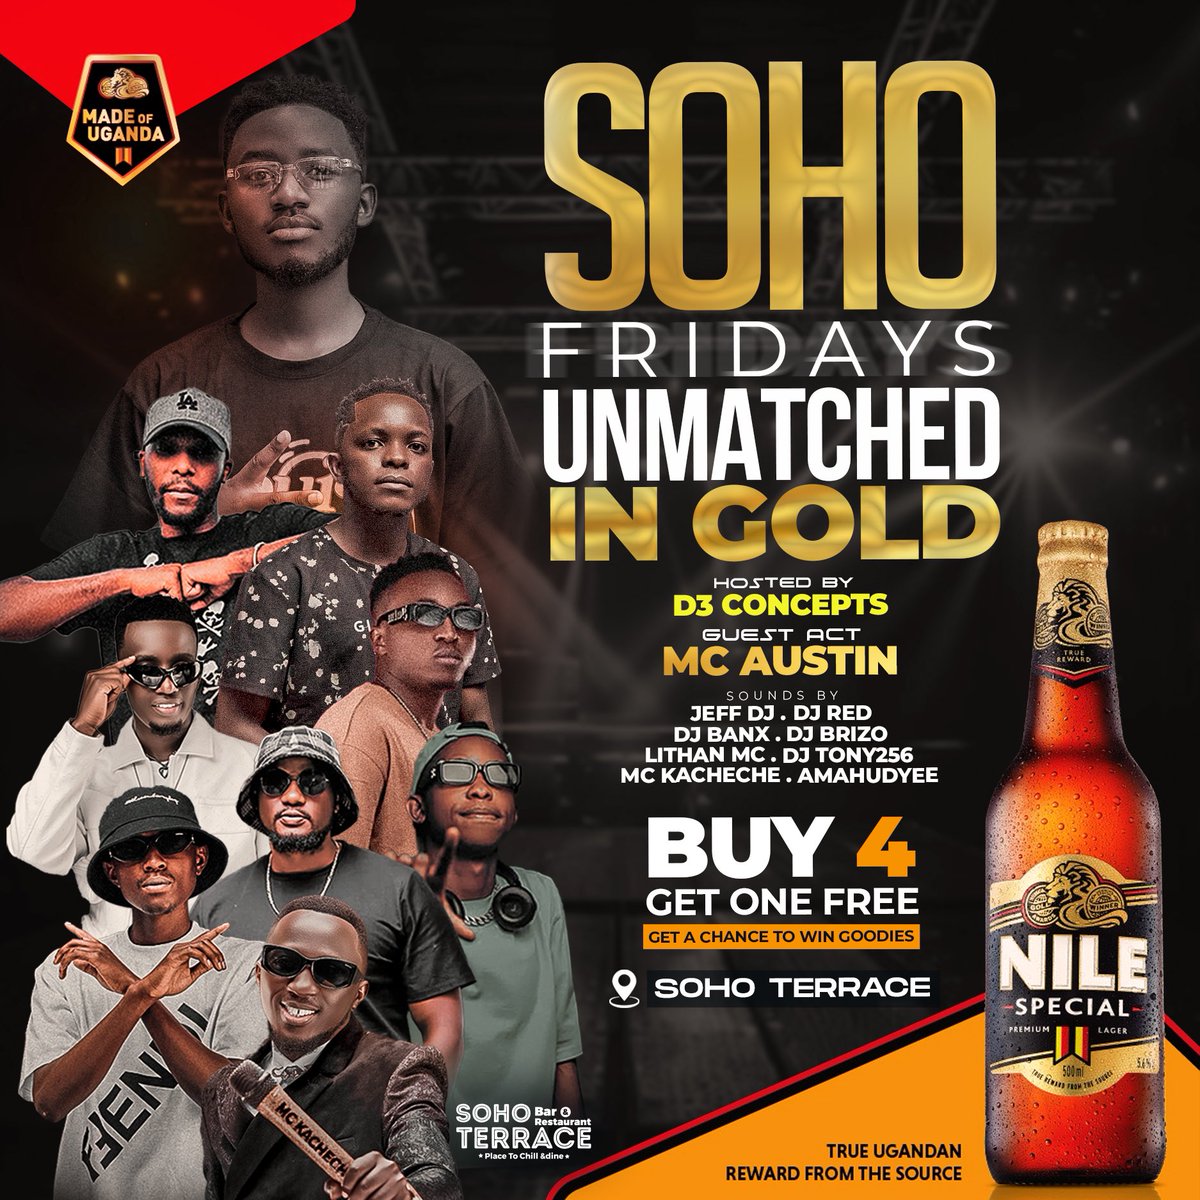 Early kickoff The Unmatched energy in Gold We are at @SoHoTerraceMbra tonight #SoHoFridays